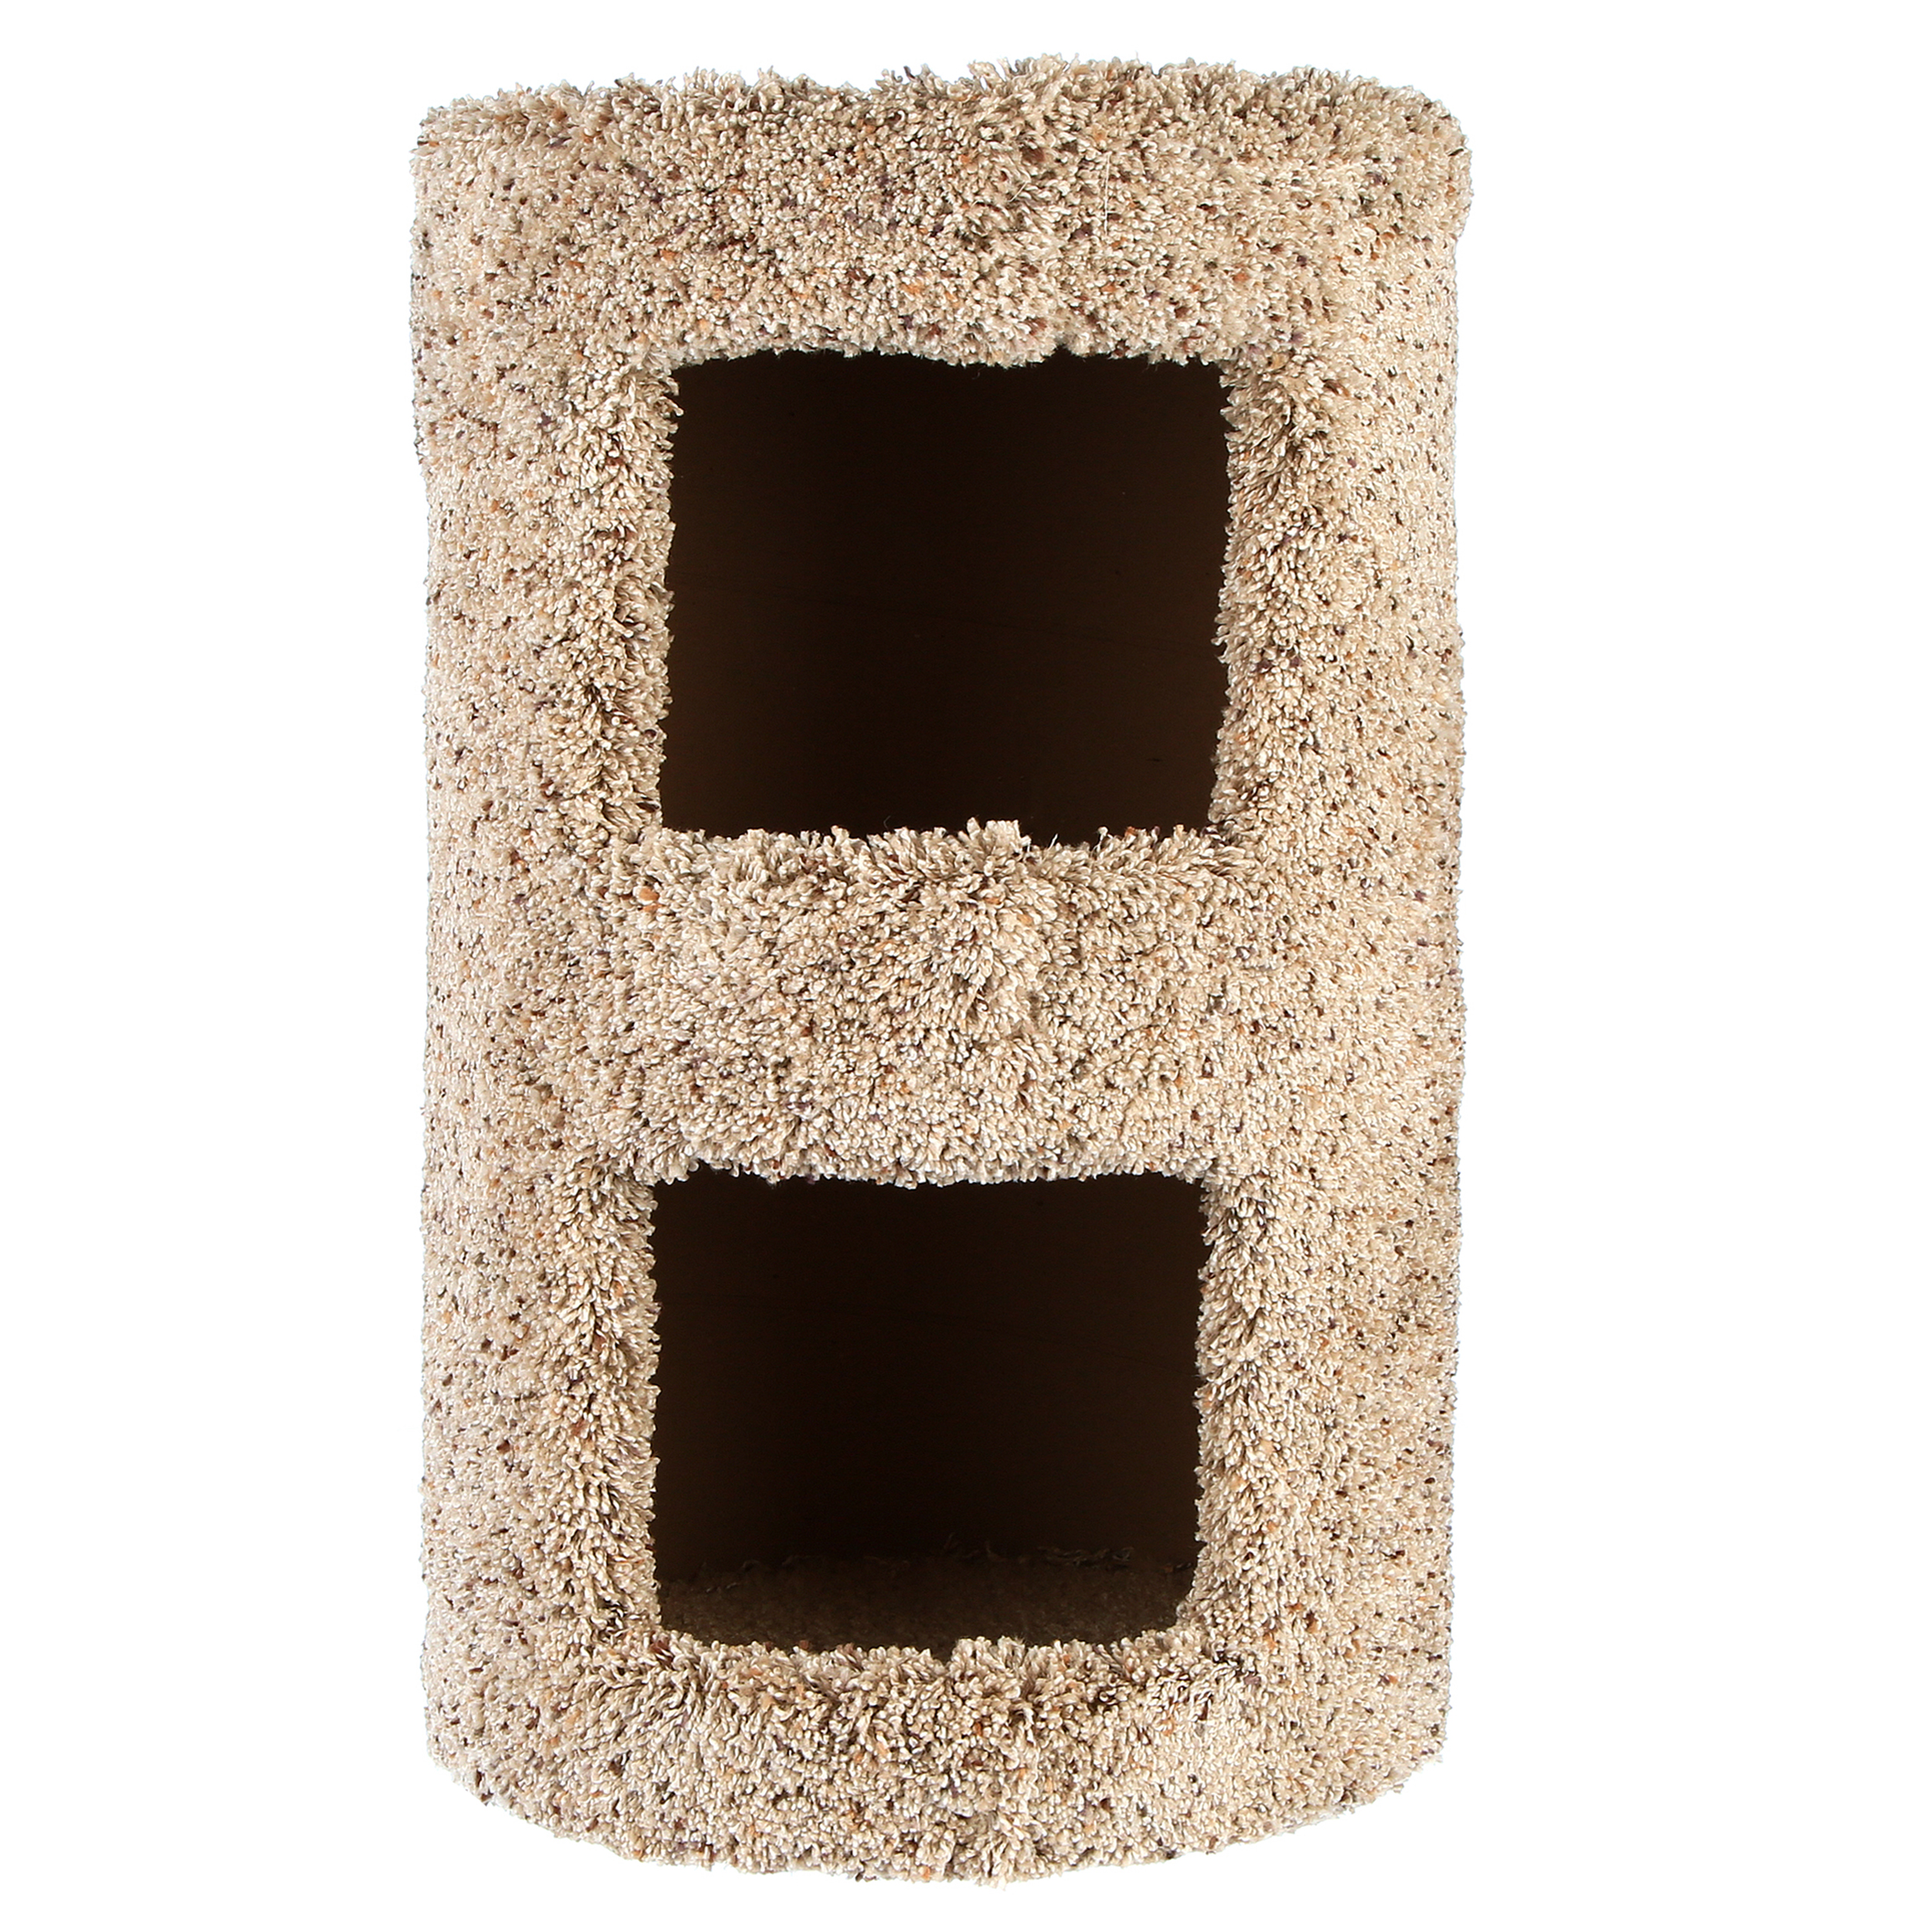 Classy Kitty 75-in Cat Tree & Condo Scratching Post Tower, Beige - image 3 of 5